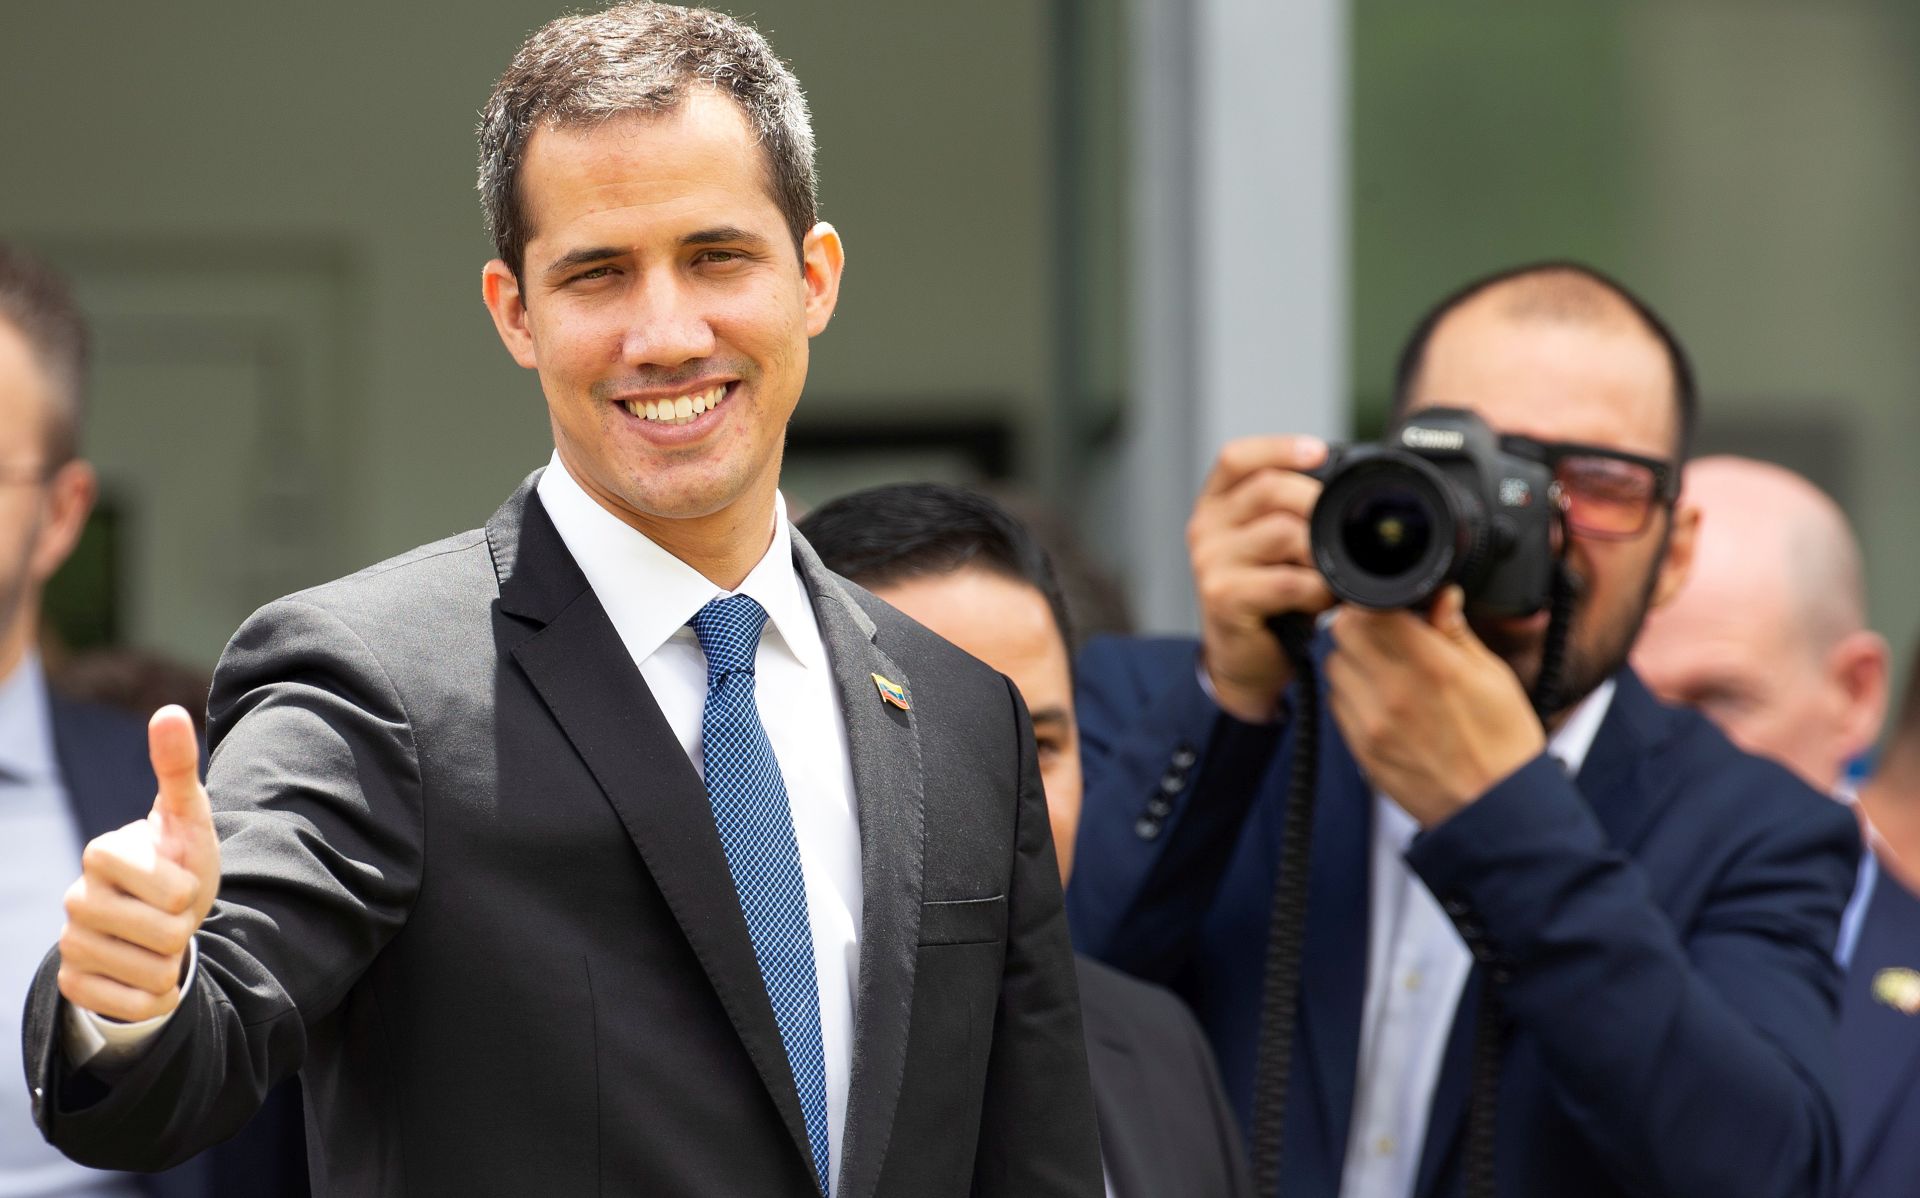 epa07404414 The head of the Parliament of Venezuela, Juan Guaido, arrives at the European Union building in Brasilia, Brazil, 28 February 2019. Guaido, who proclaimed himself interim president of Venezuela, will meet with ambassadors of those governments, before meeting with Brazilian President Bolsonaro. The meeting with the ambassadors will be his first commitment in the Brazilian capital, to which he arrived from Bogota, aboard a plane of the Colombian Air Force.  EPA/Joedson Alves